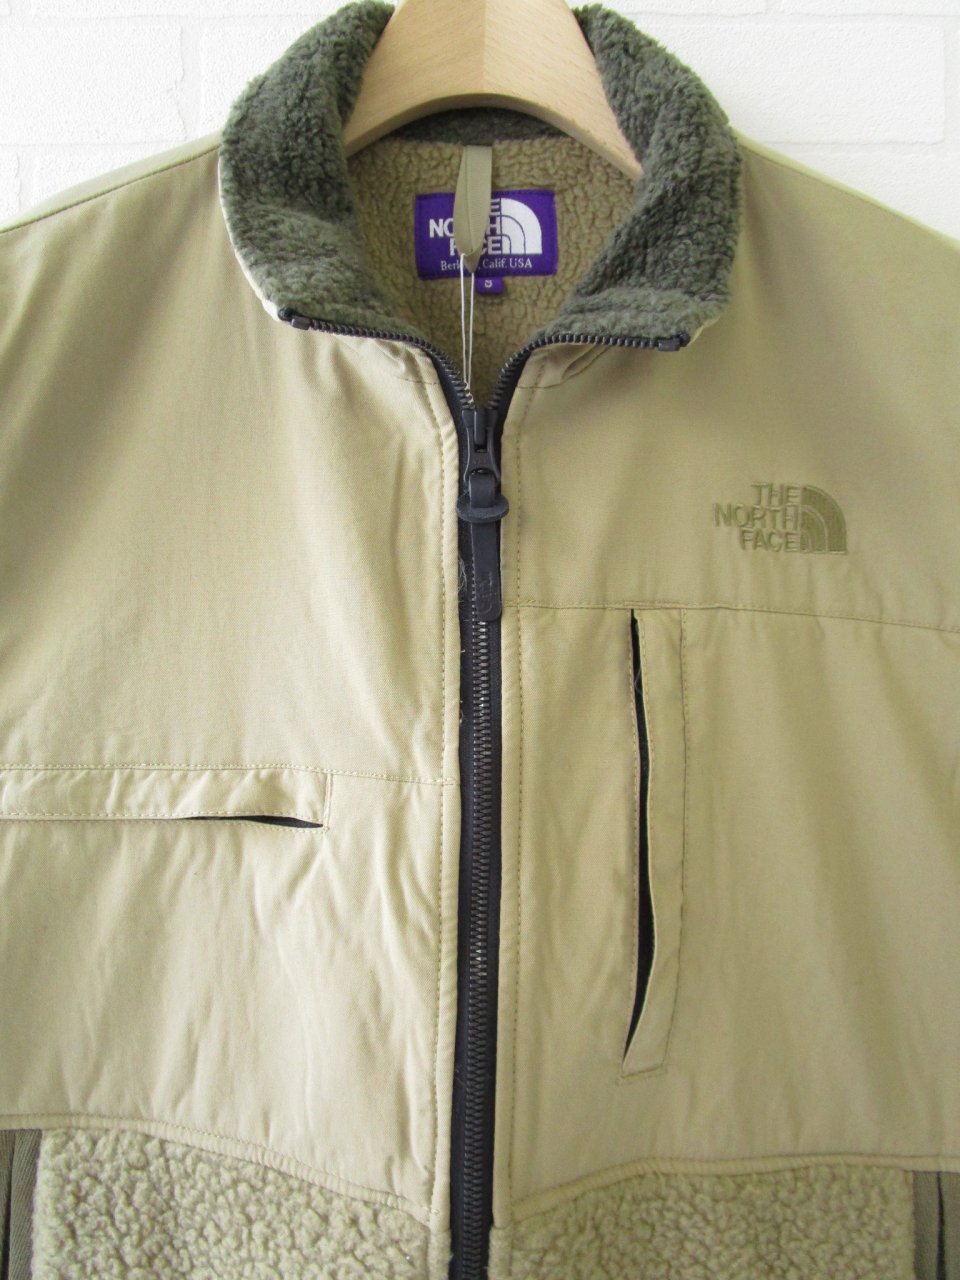 THE NORTH FACE - ポーラテック デナリ ベスト - Sheth Online Store